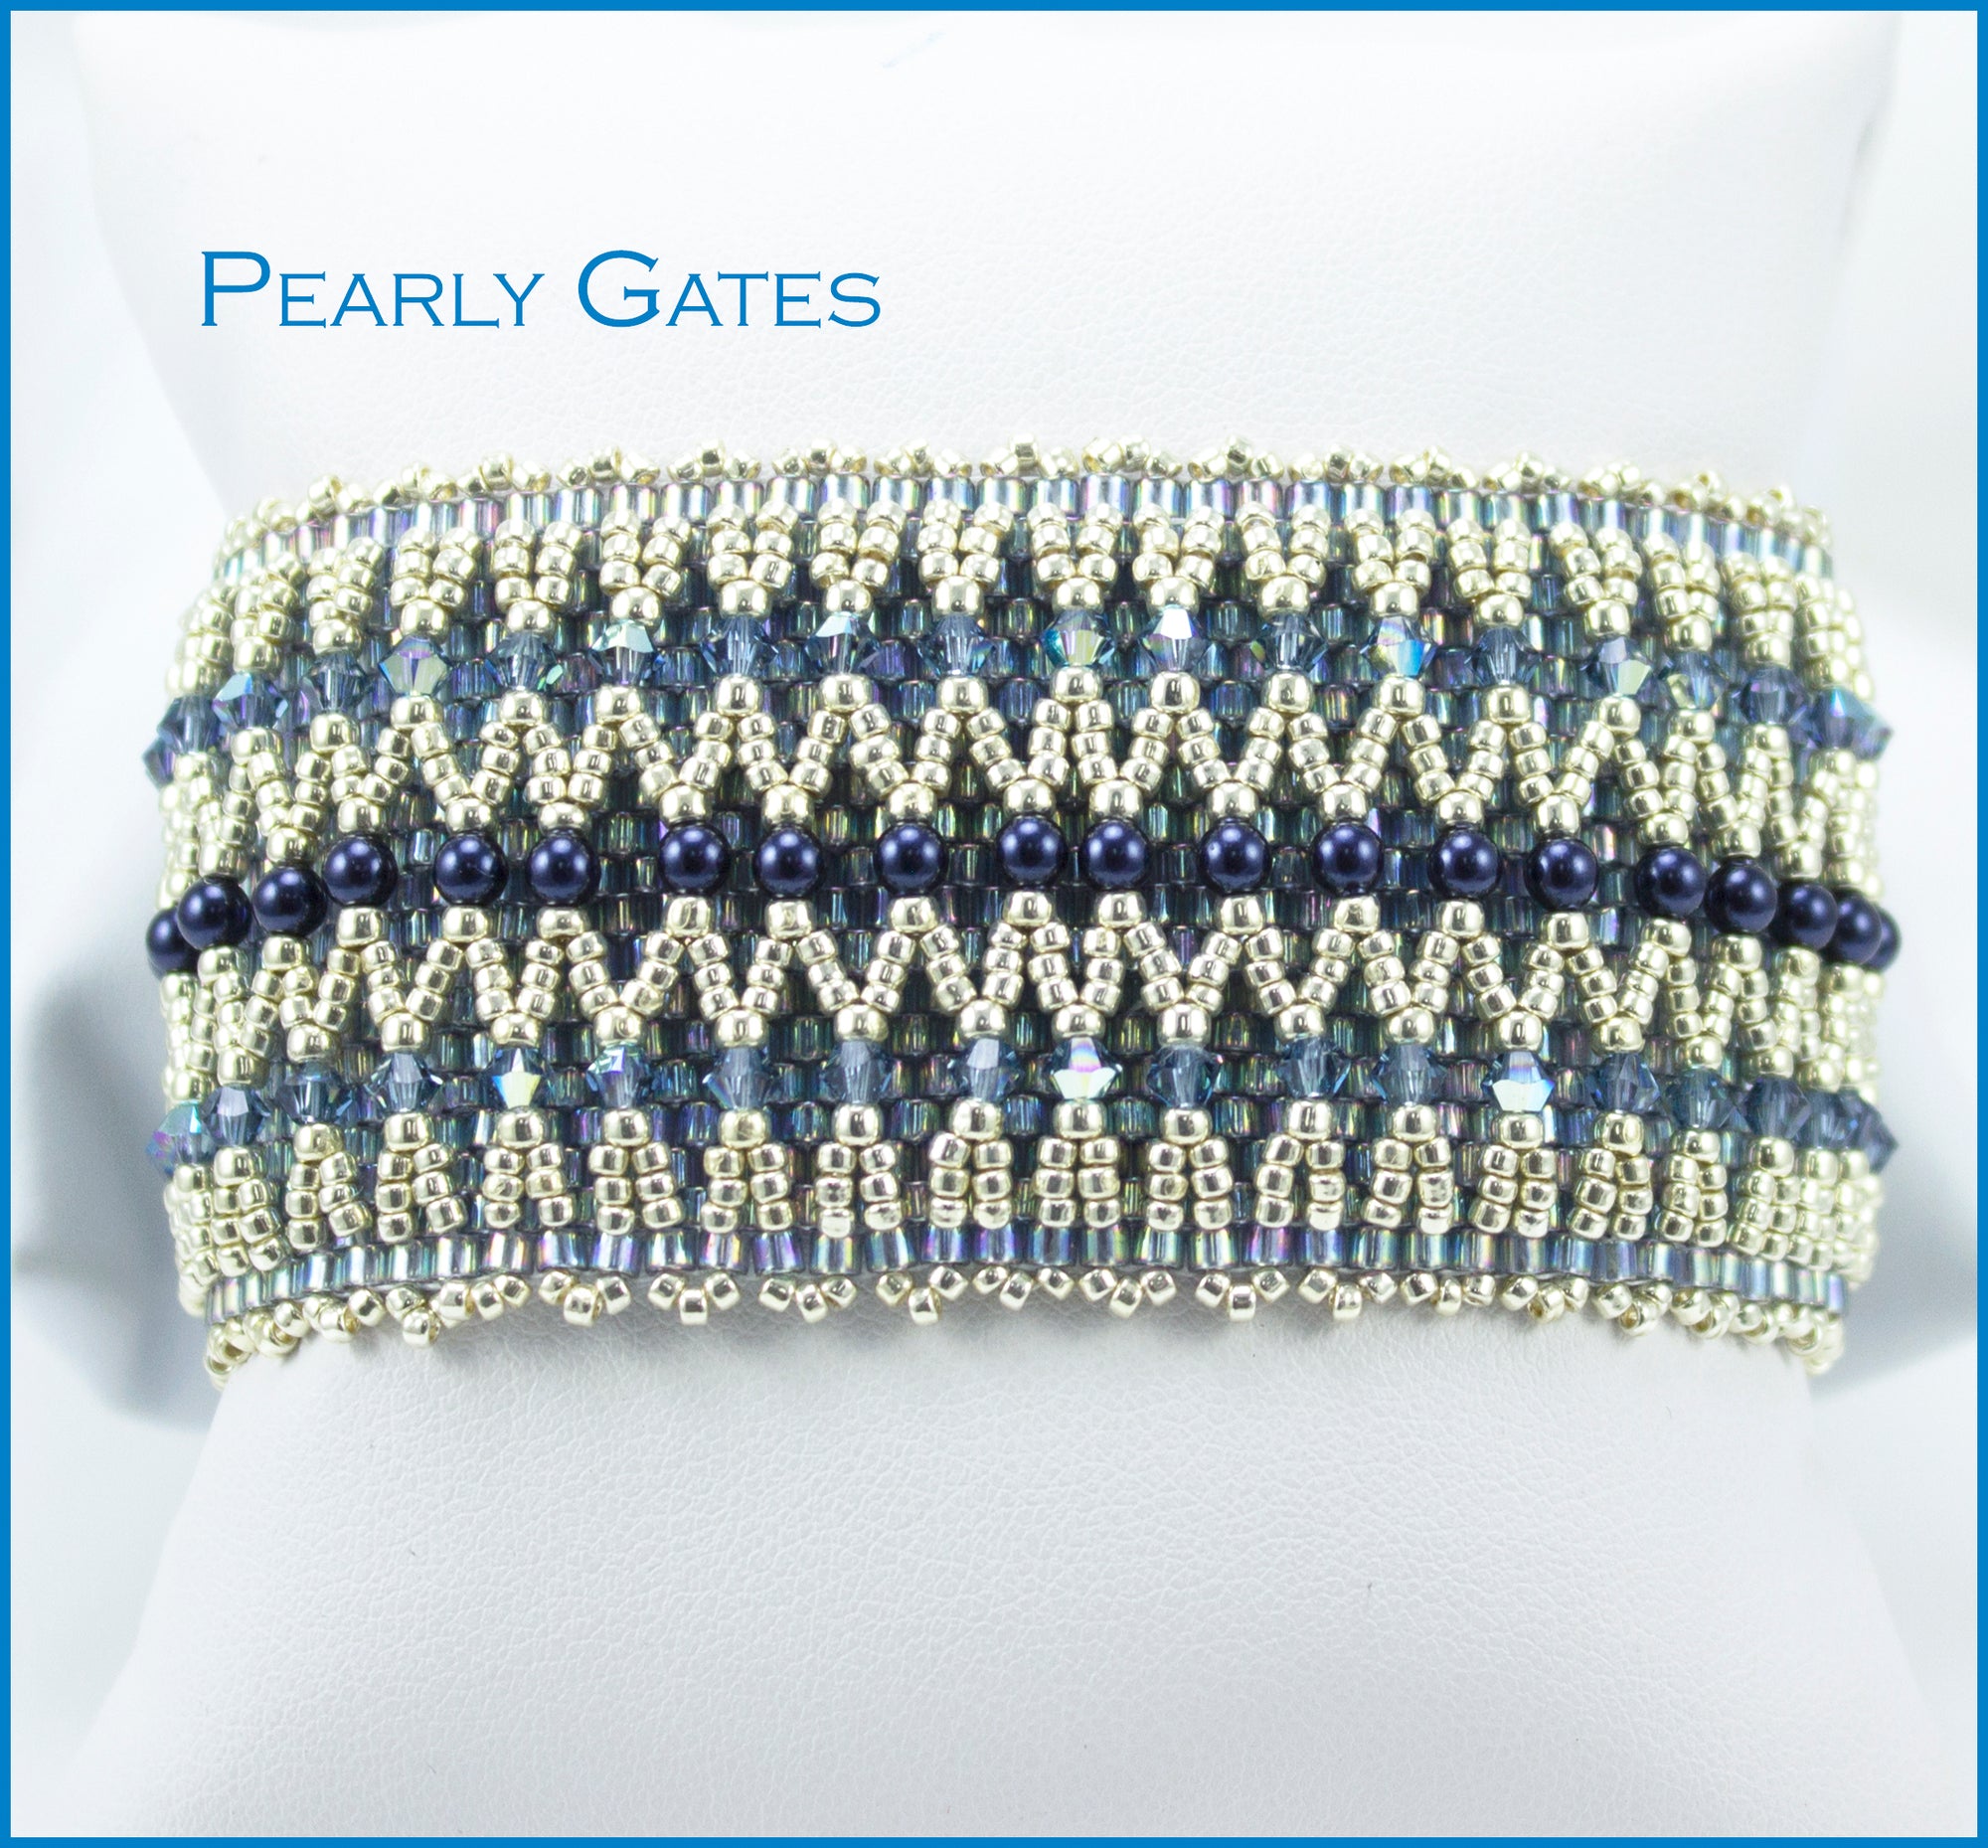 Pearly Gates Bracelet Bead Weaving Instructions Only